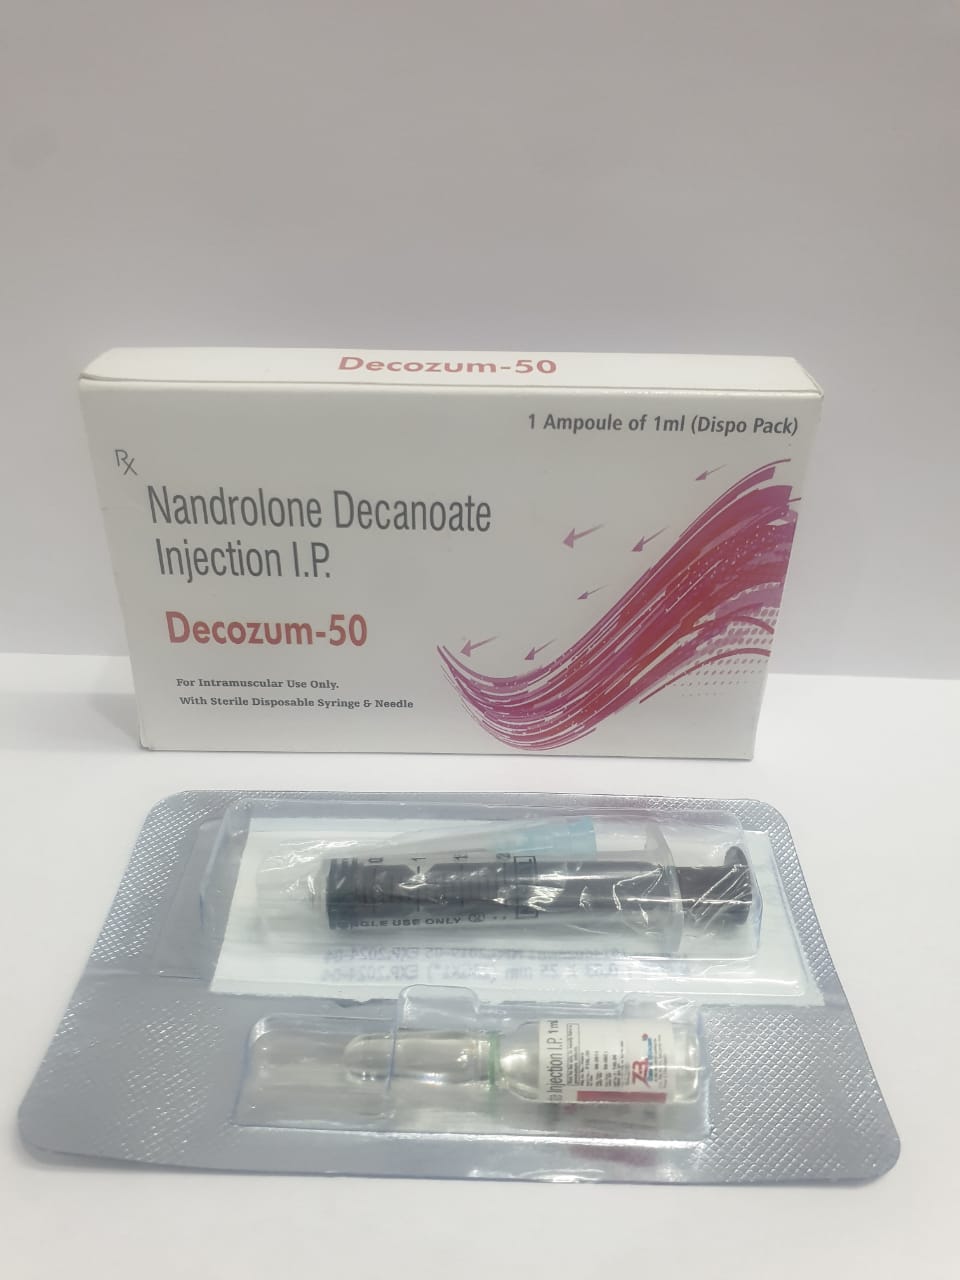 Product Name: Decozum 50, Compositions of Nandrolone Decanoate Injection IP are Nandrolone Decanoate Injection IP - Zumax Biocare